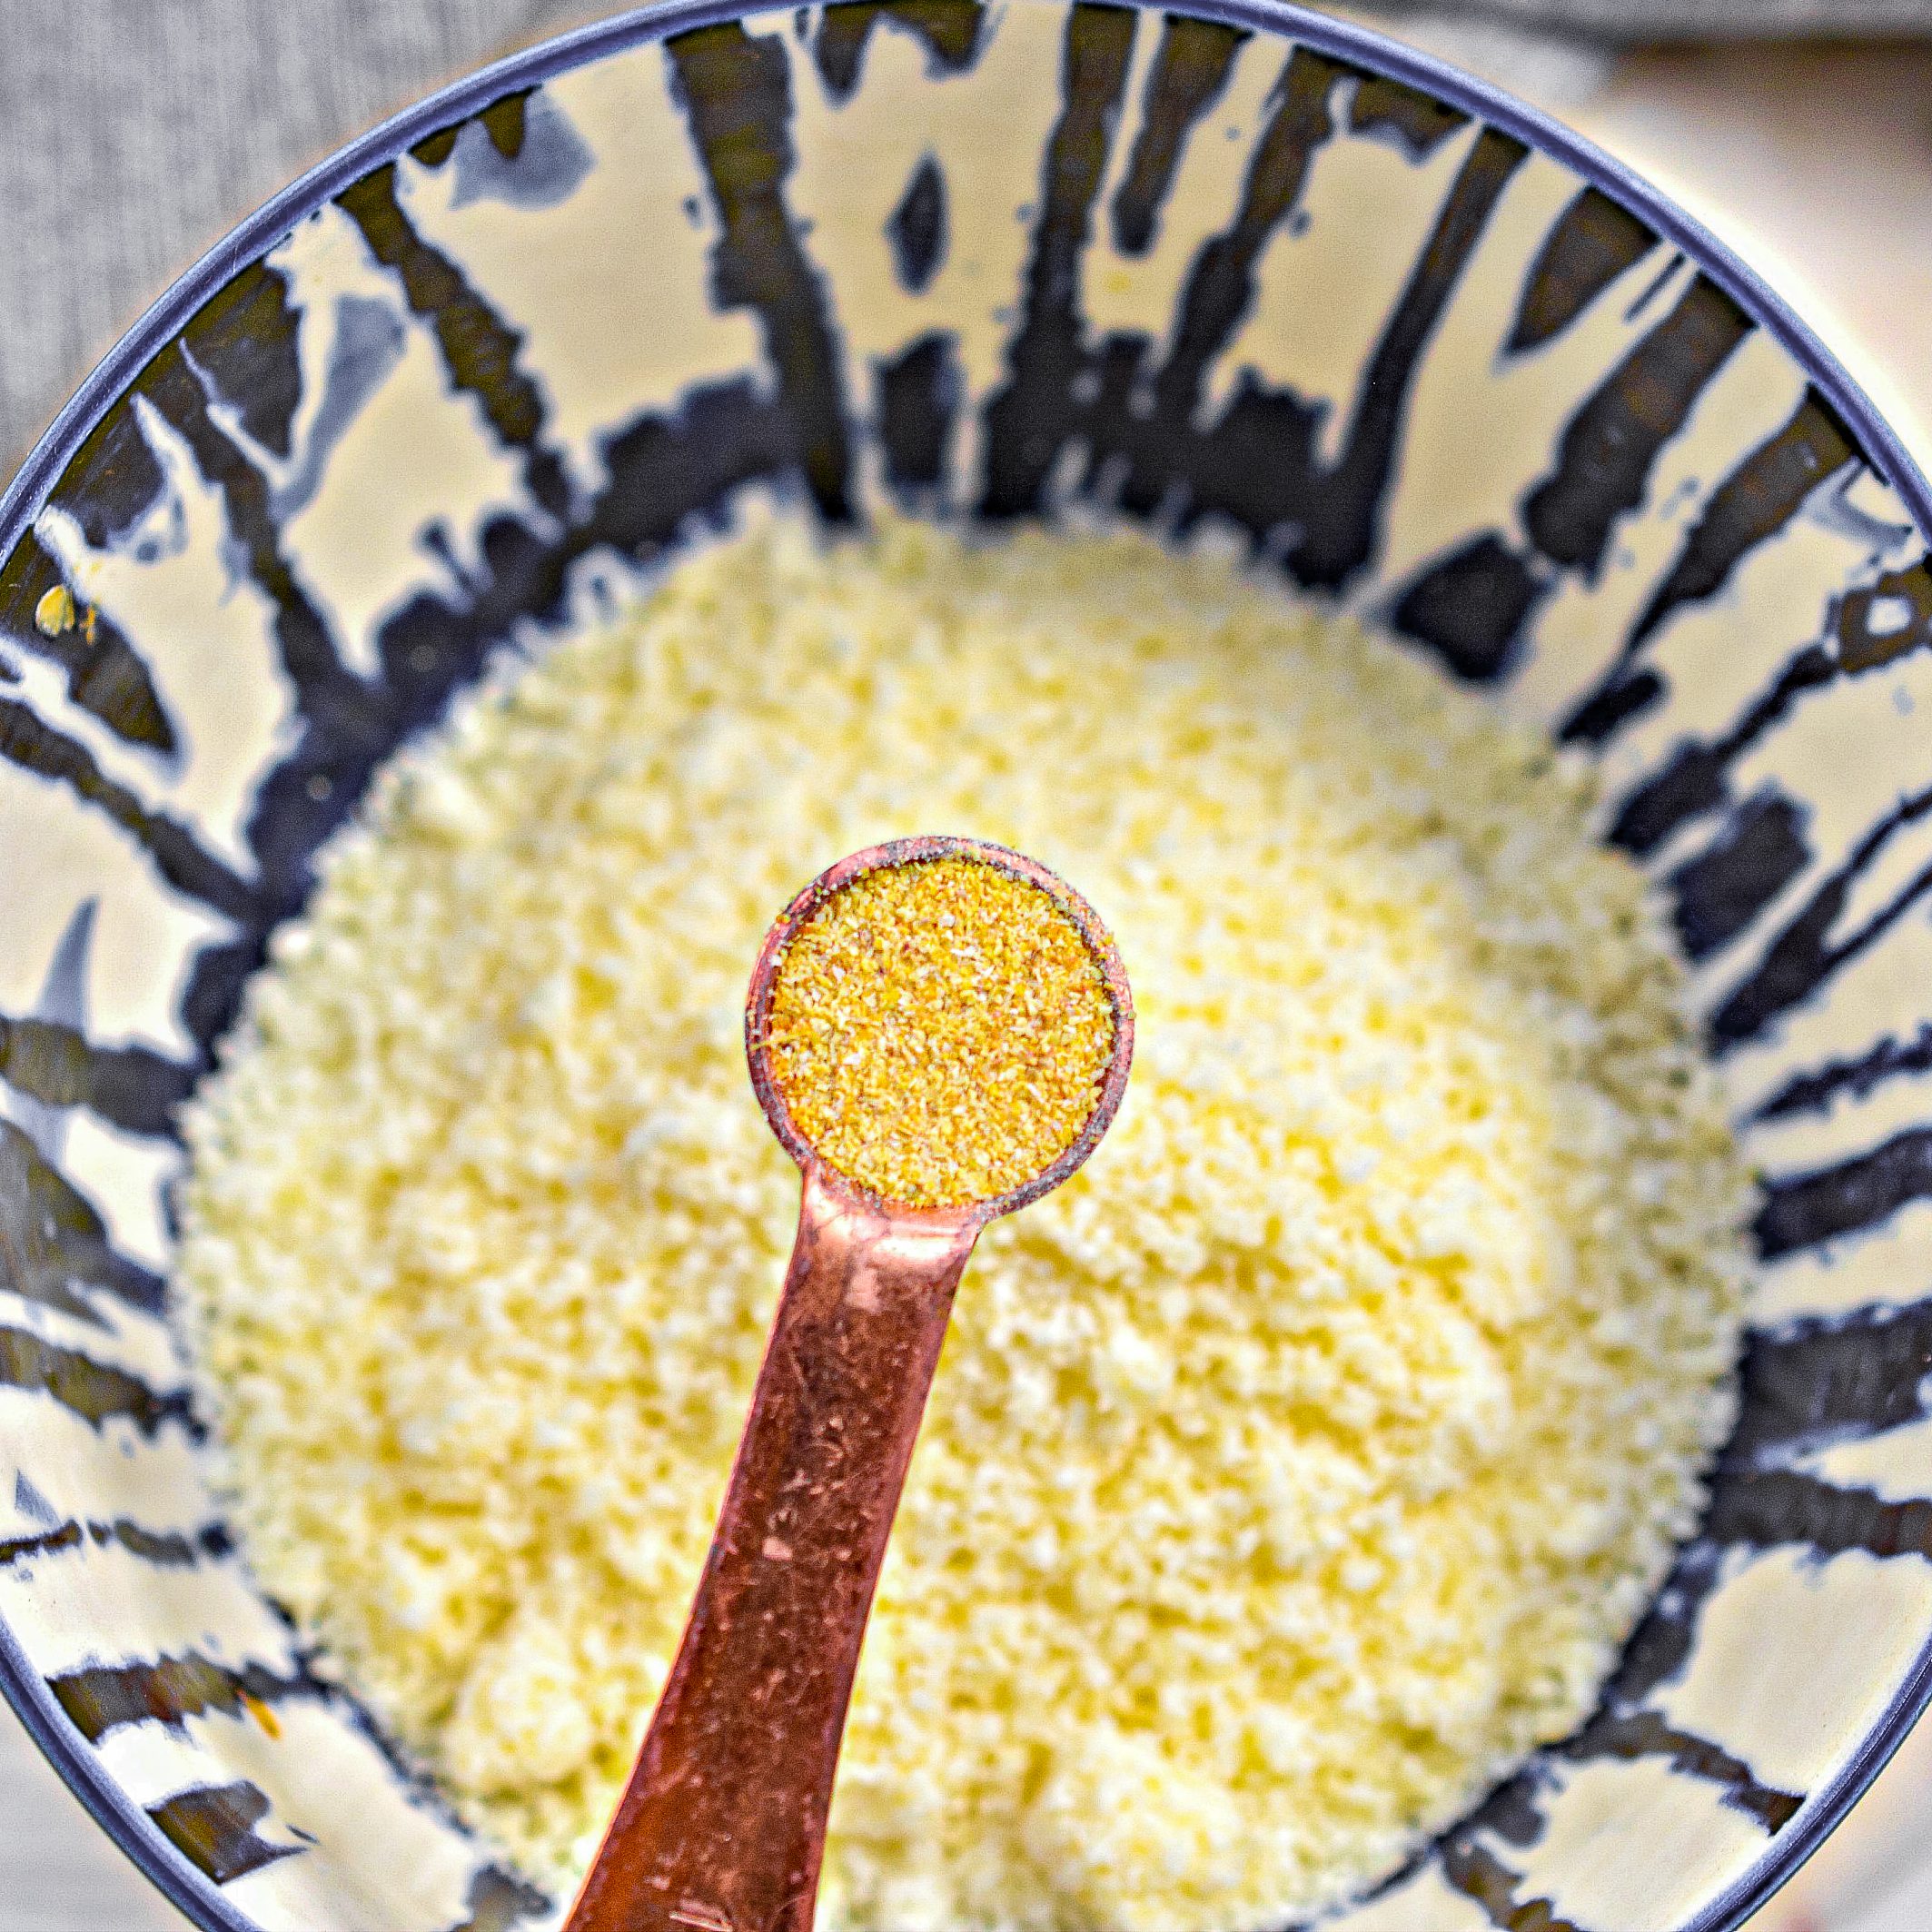 Mix together the butter, panko crumbs, Parmesan cheese, garlic powder, and chopped parsley in a bowl until well combined.